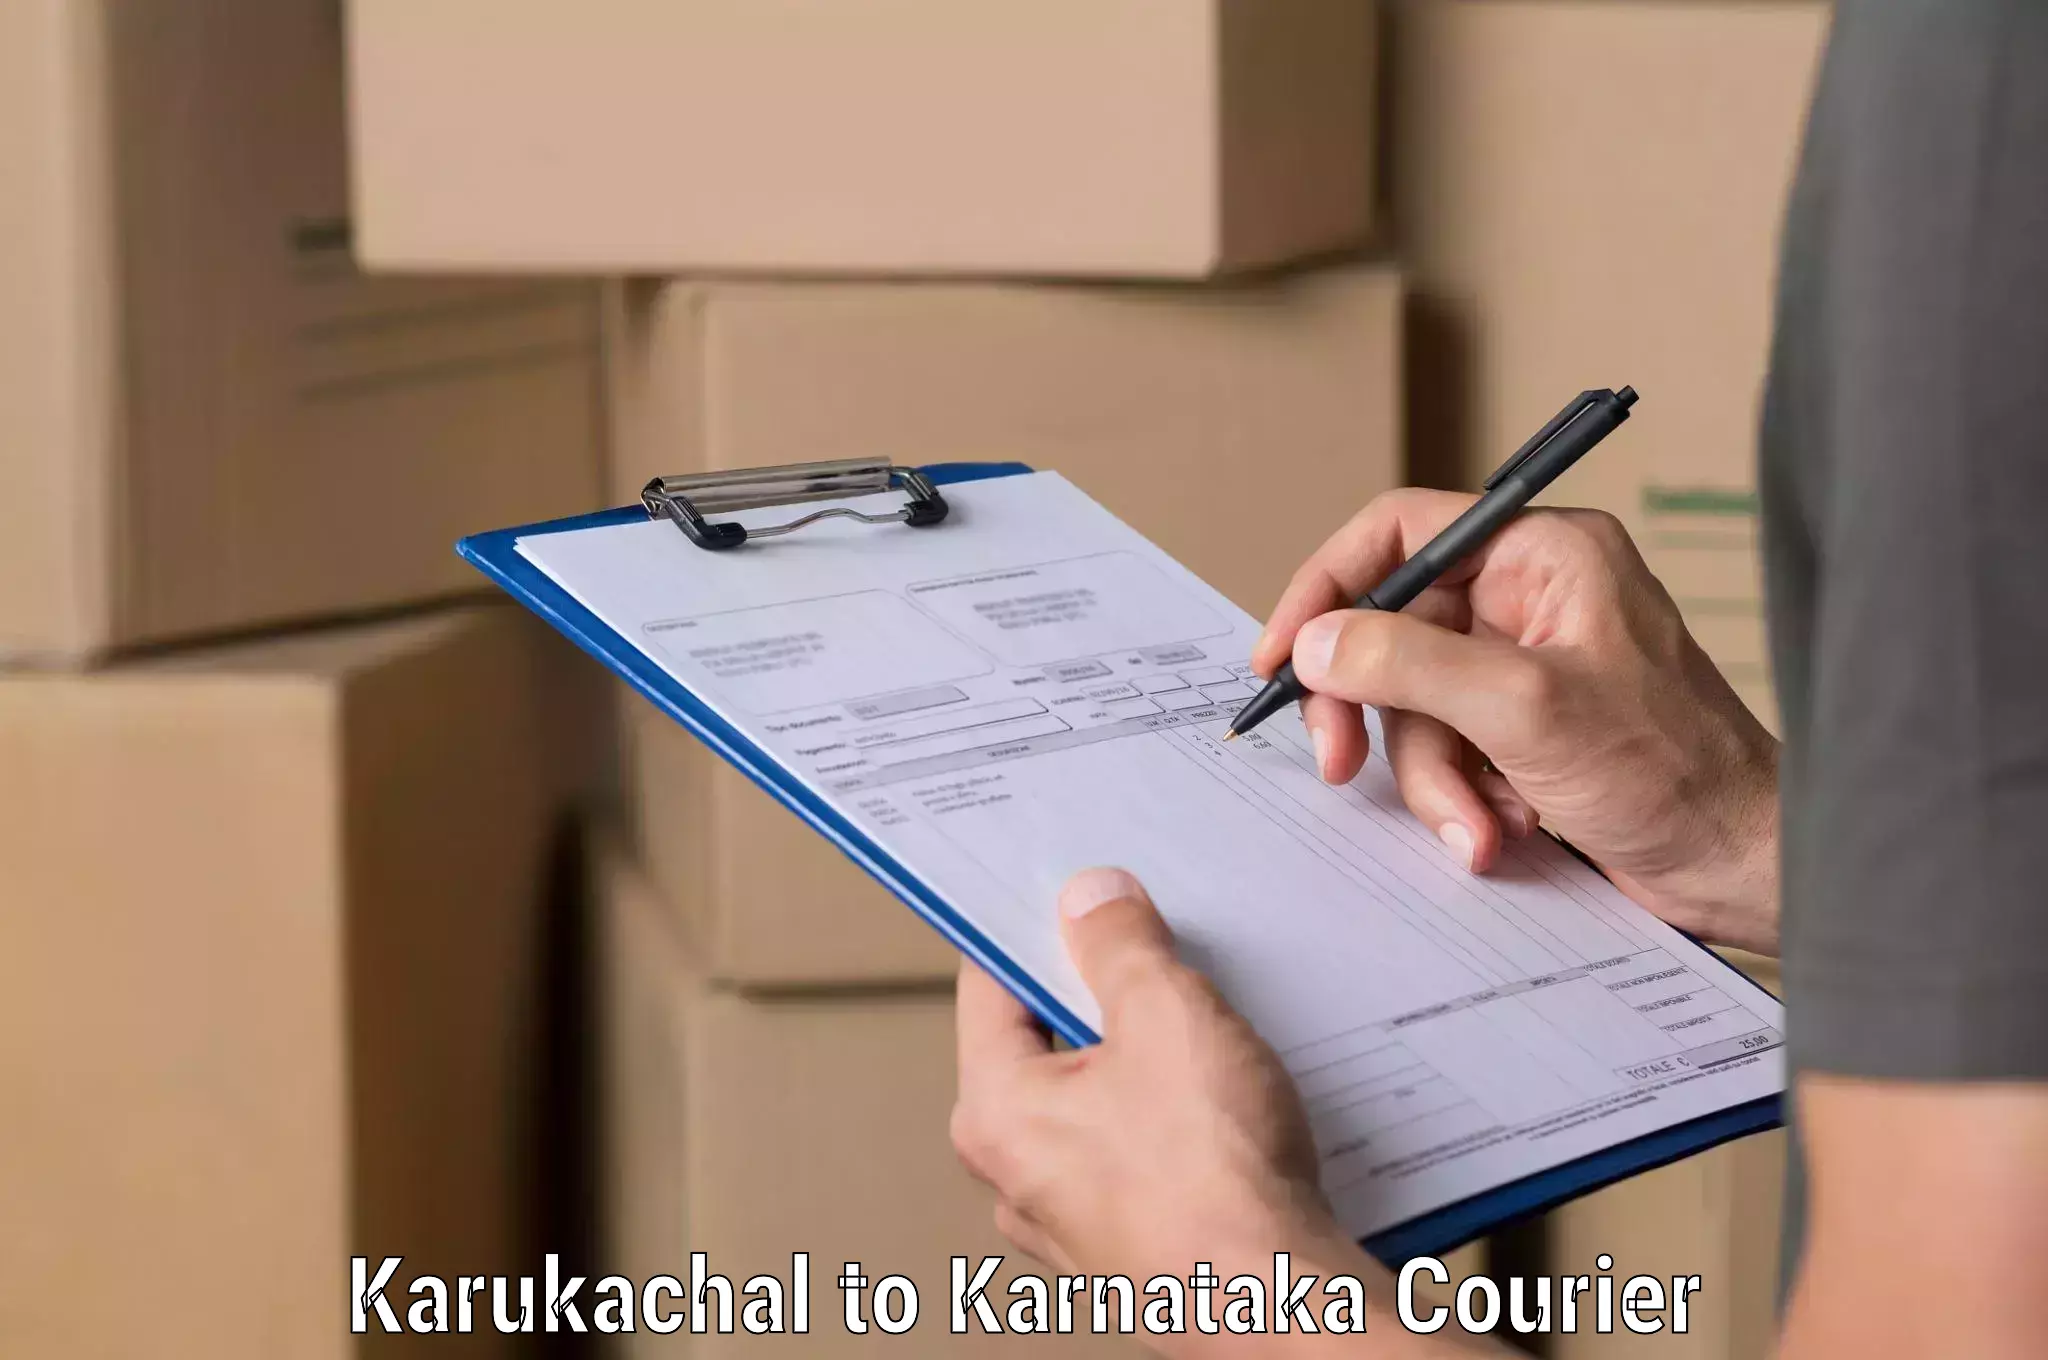 Trackable shipping service Karukachal to Bangalore